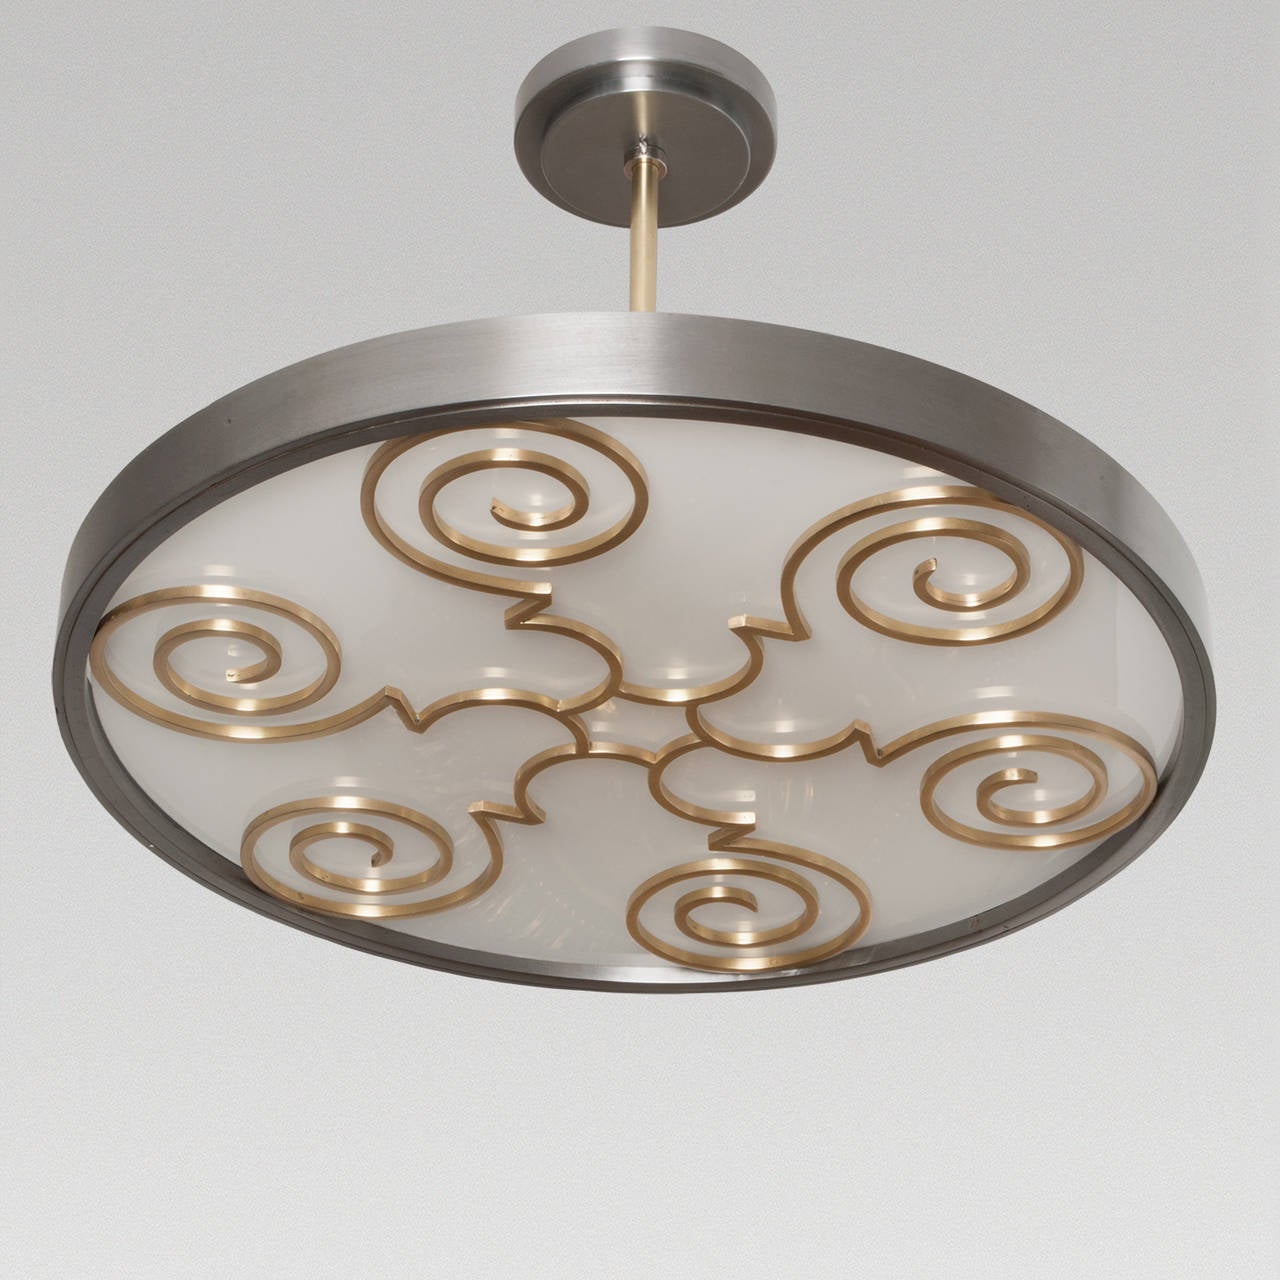 Swedish Art Deco ceiling fixture by Lars Holmstrom a co-founder and member of the Arvika Konsthantverk. This fixture has a body of polished steel with a decorative grille of polished brass. A white glass diffuser covers three-light sockets. The